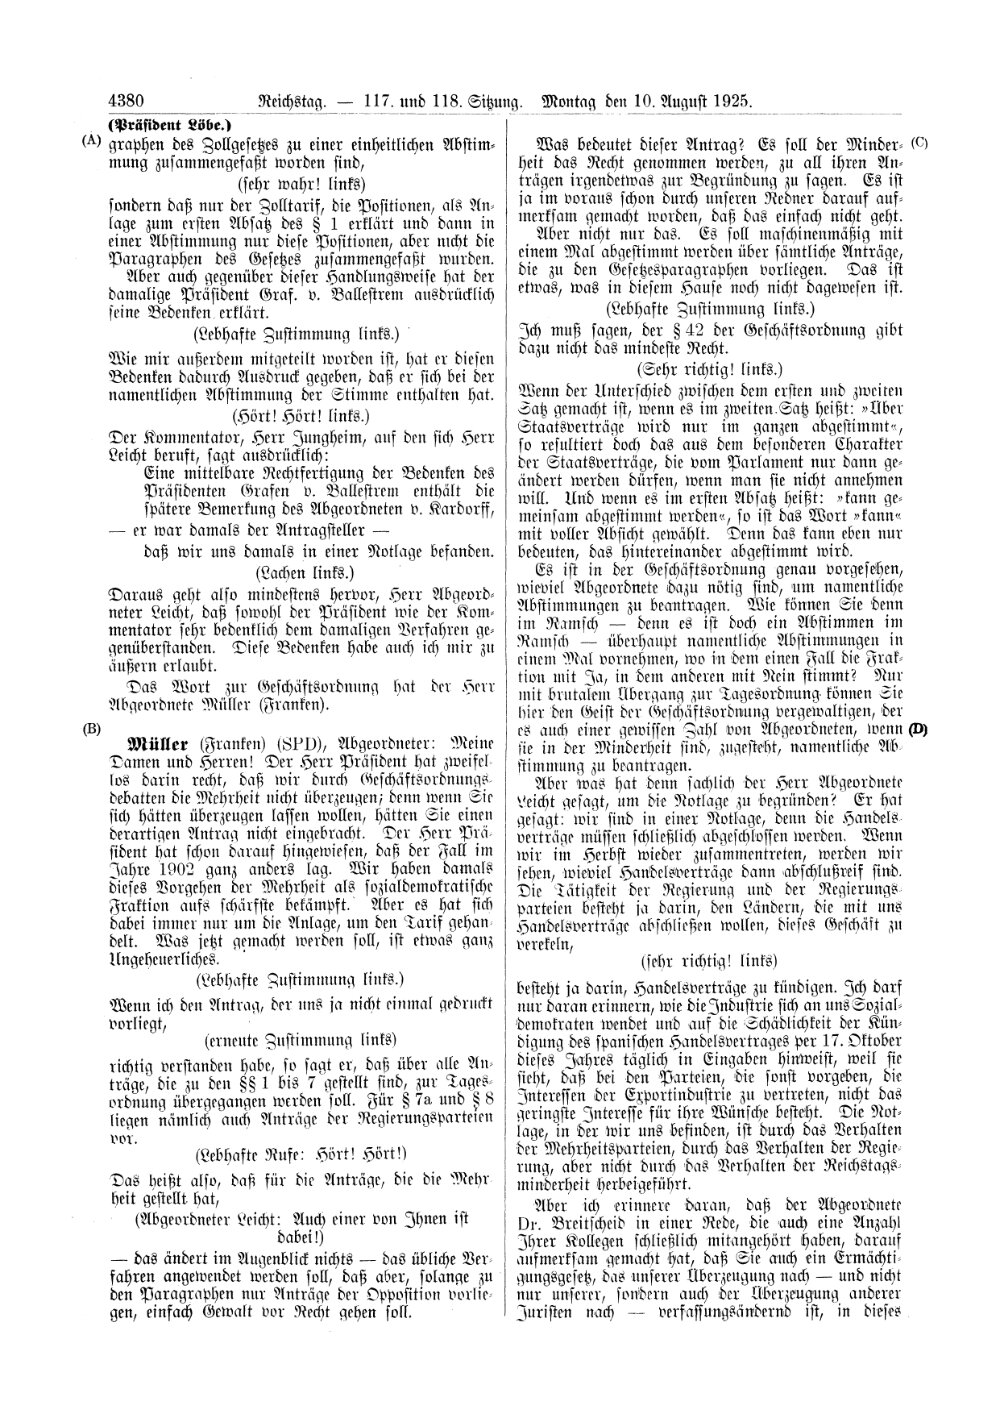 Scan of page 4380